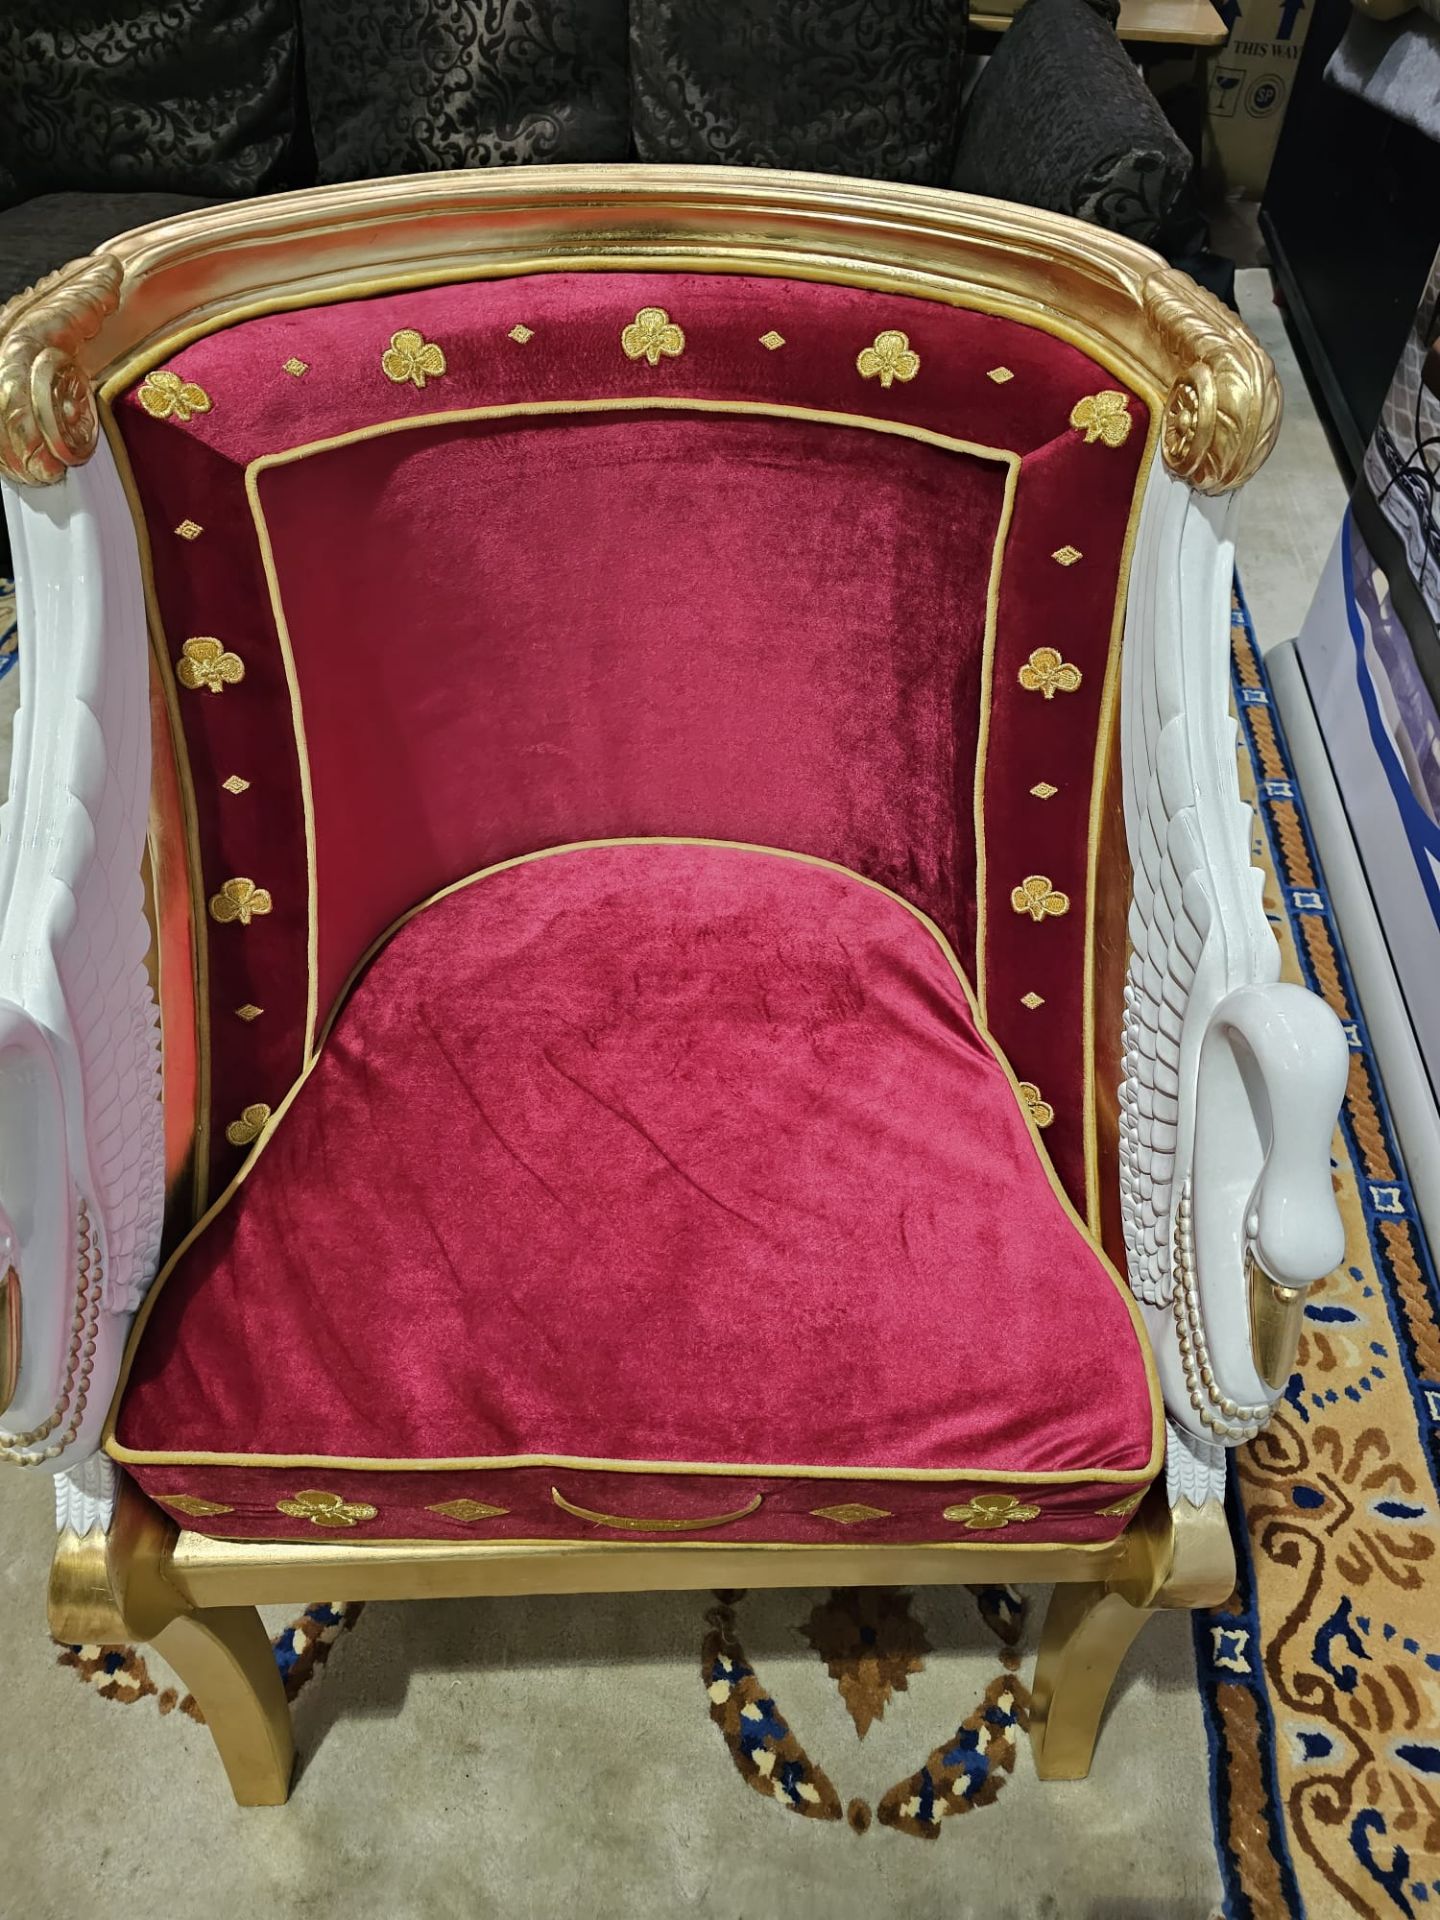 French Empire Style Fauteuil Inspired By The Early 19th Century Designs Of Jacob-Desmalter The - Image 3 of 11